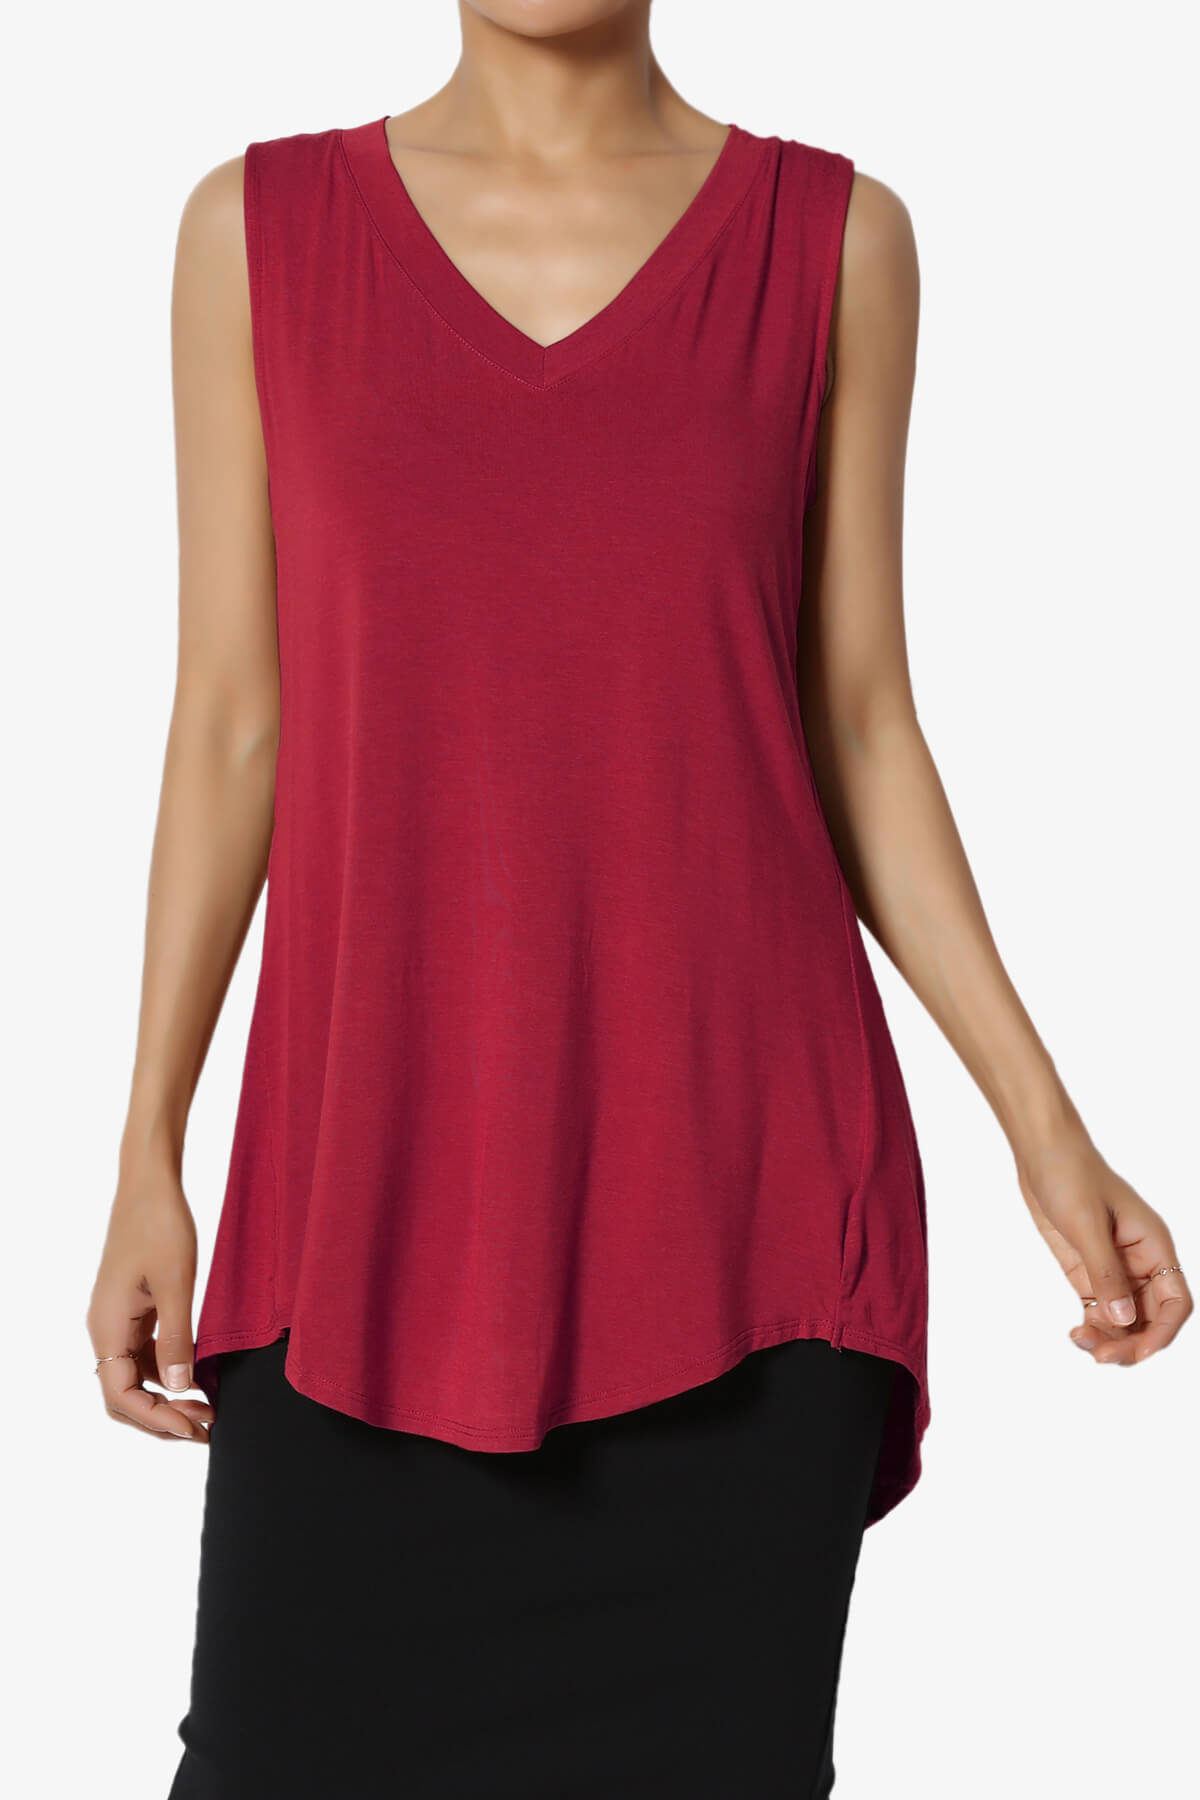 Load image into Gallery viewer, Myles Sleeveless V-Neck Luxe Jersey Top BURGUNDY_1
